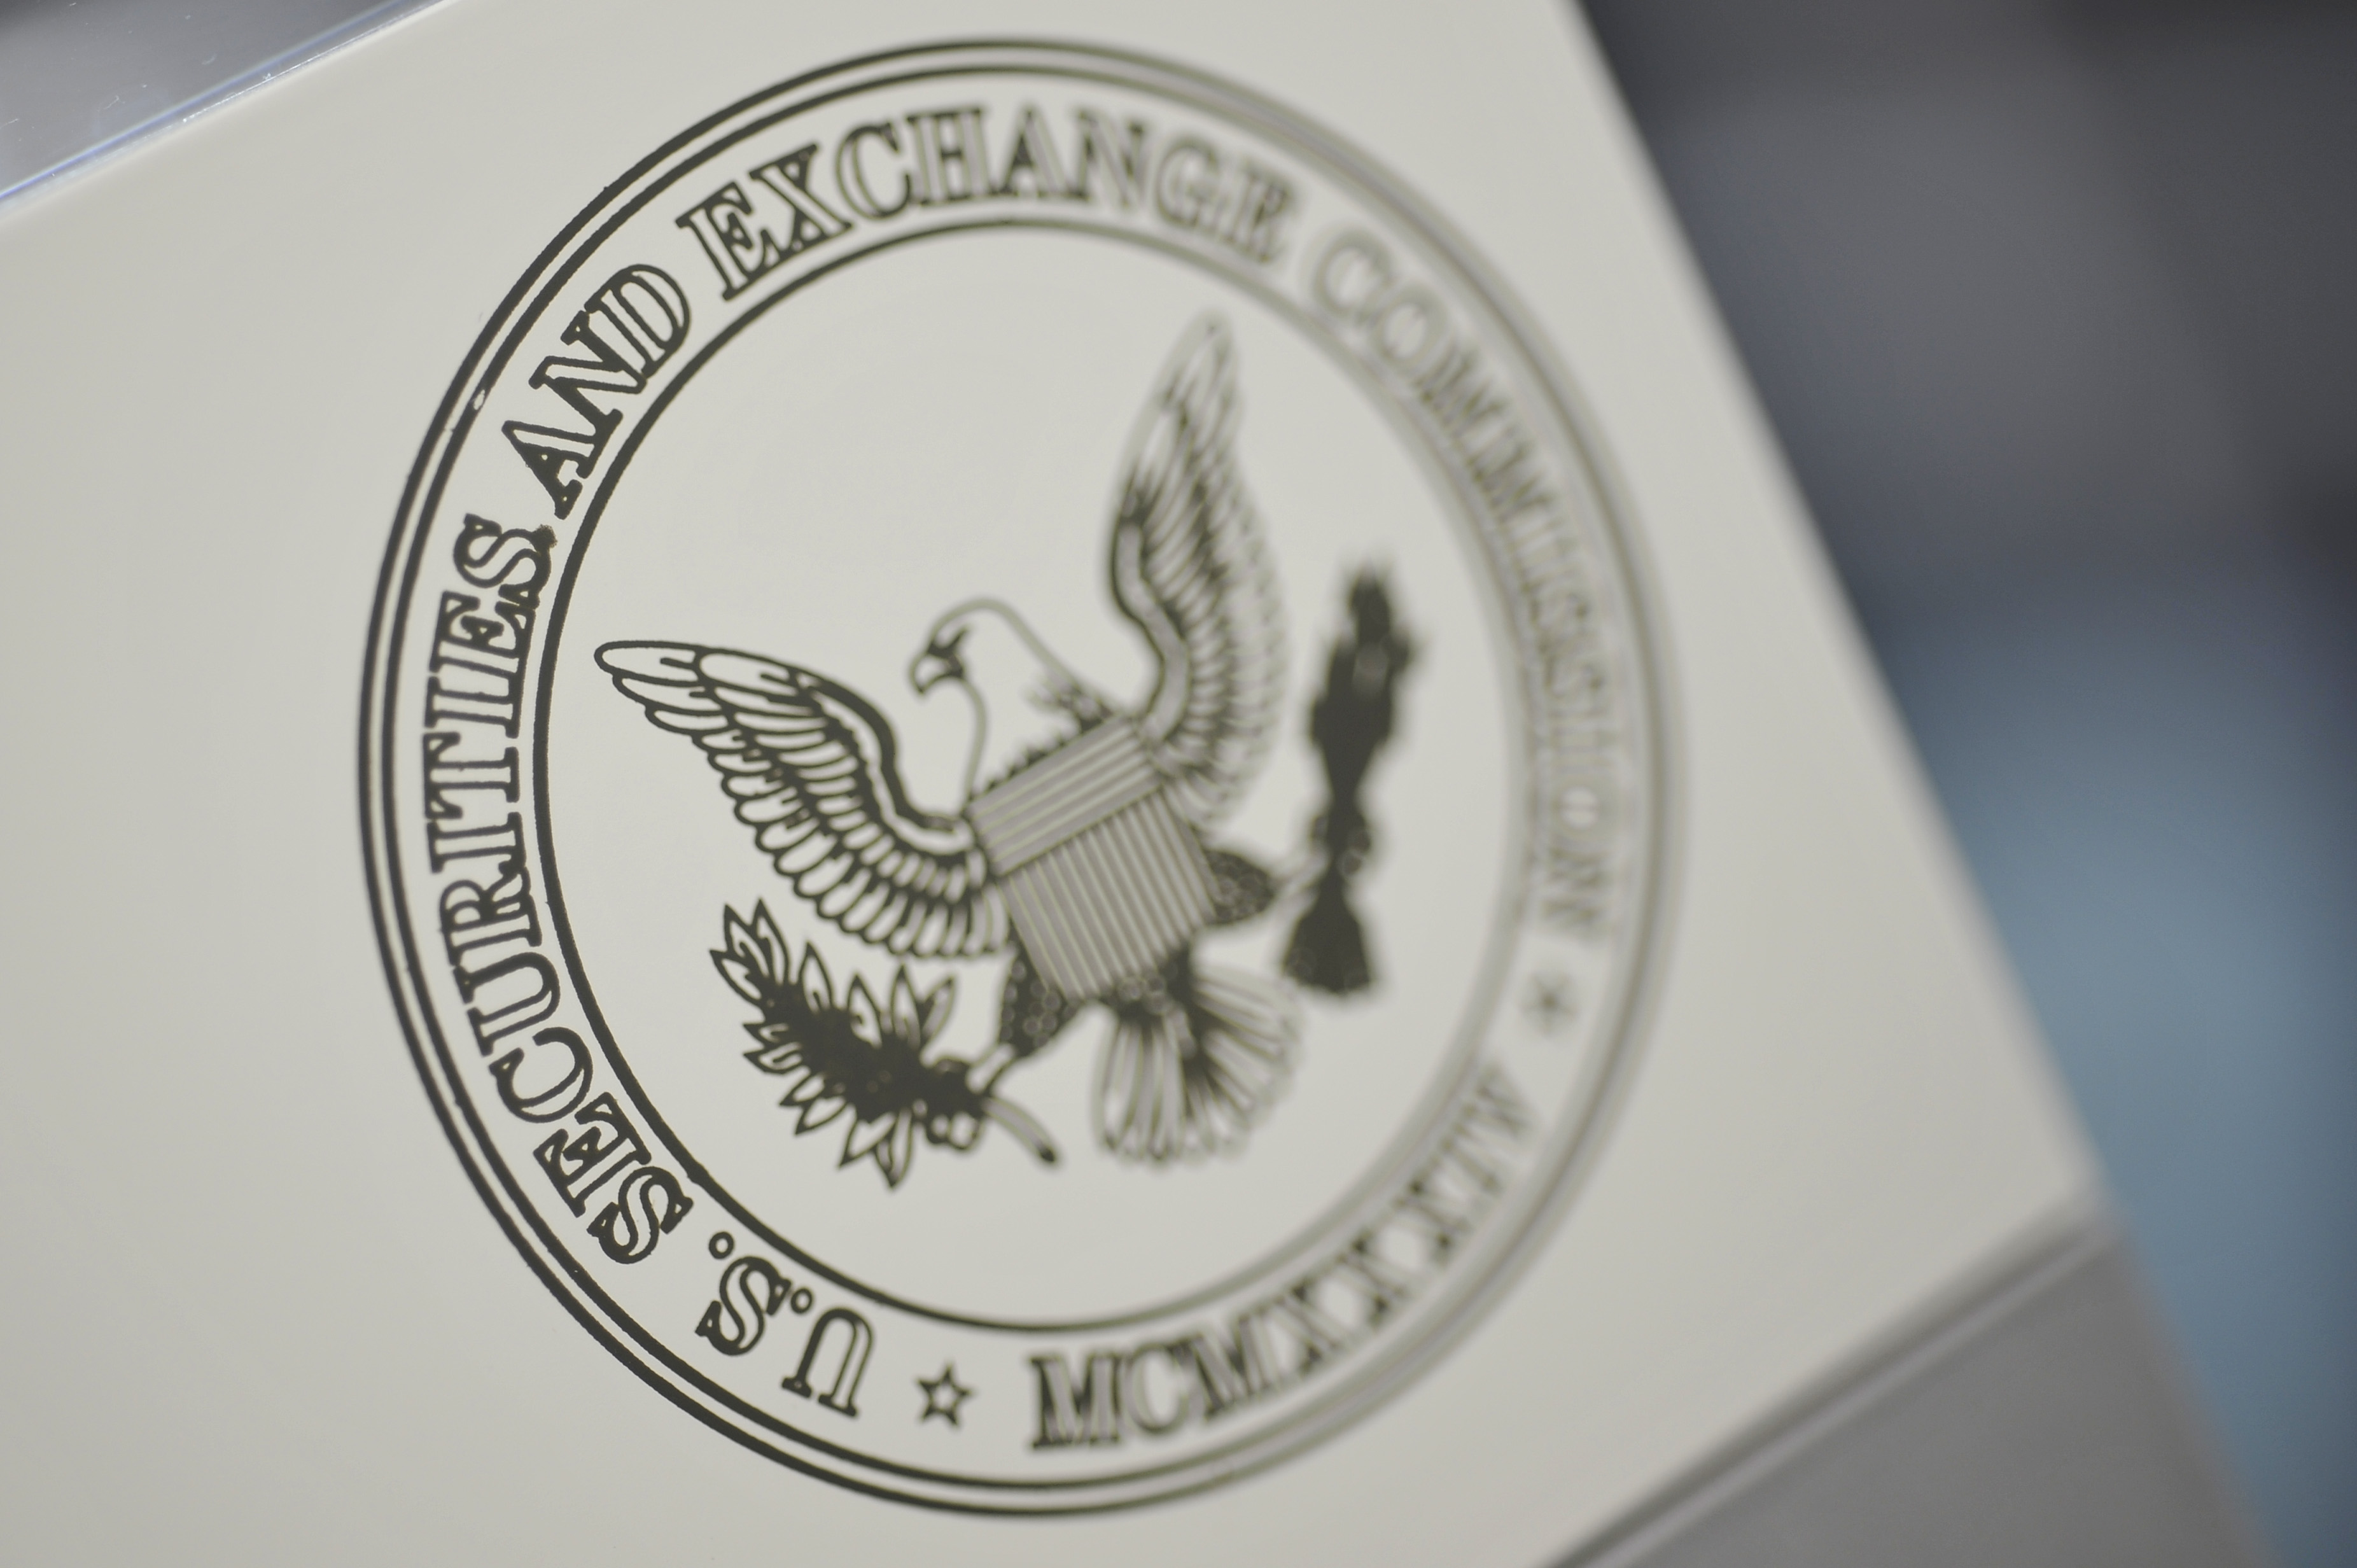 The U.S. Securities and Exchange Commission logo adorns an office door at the SEC headquarters in Washington, June 24, 2011. Picture taken June 24, 2011. REUTERS/Jonathan Ernst